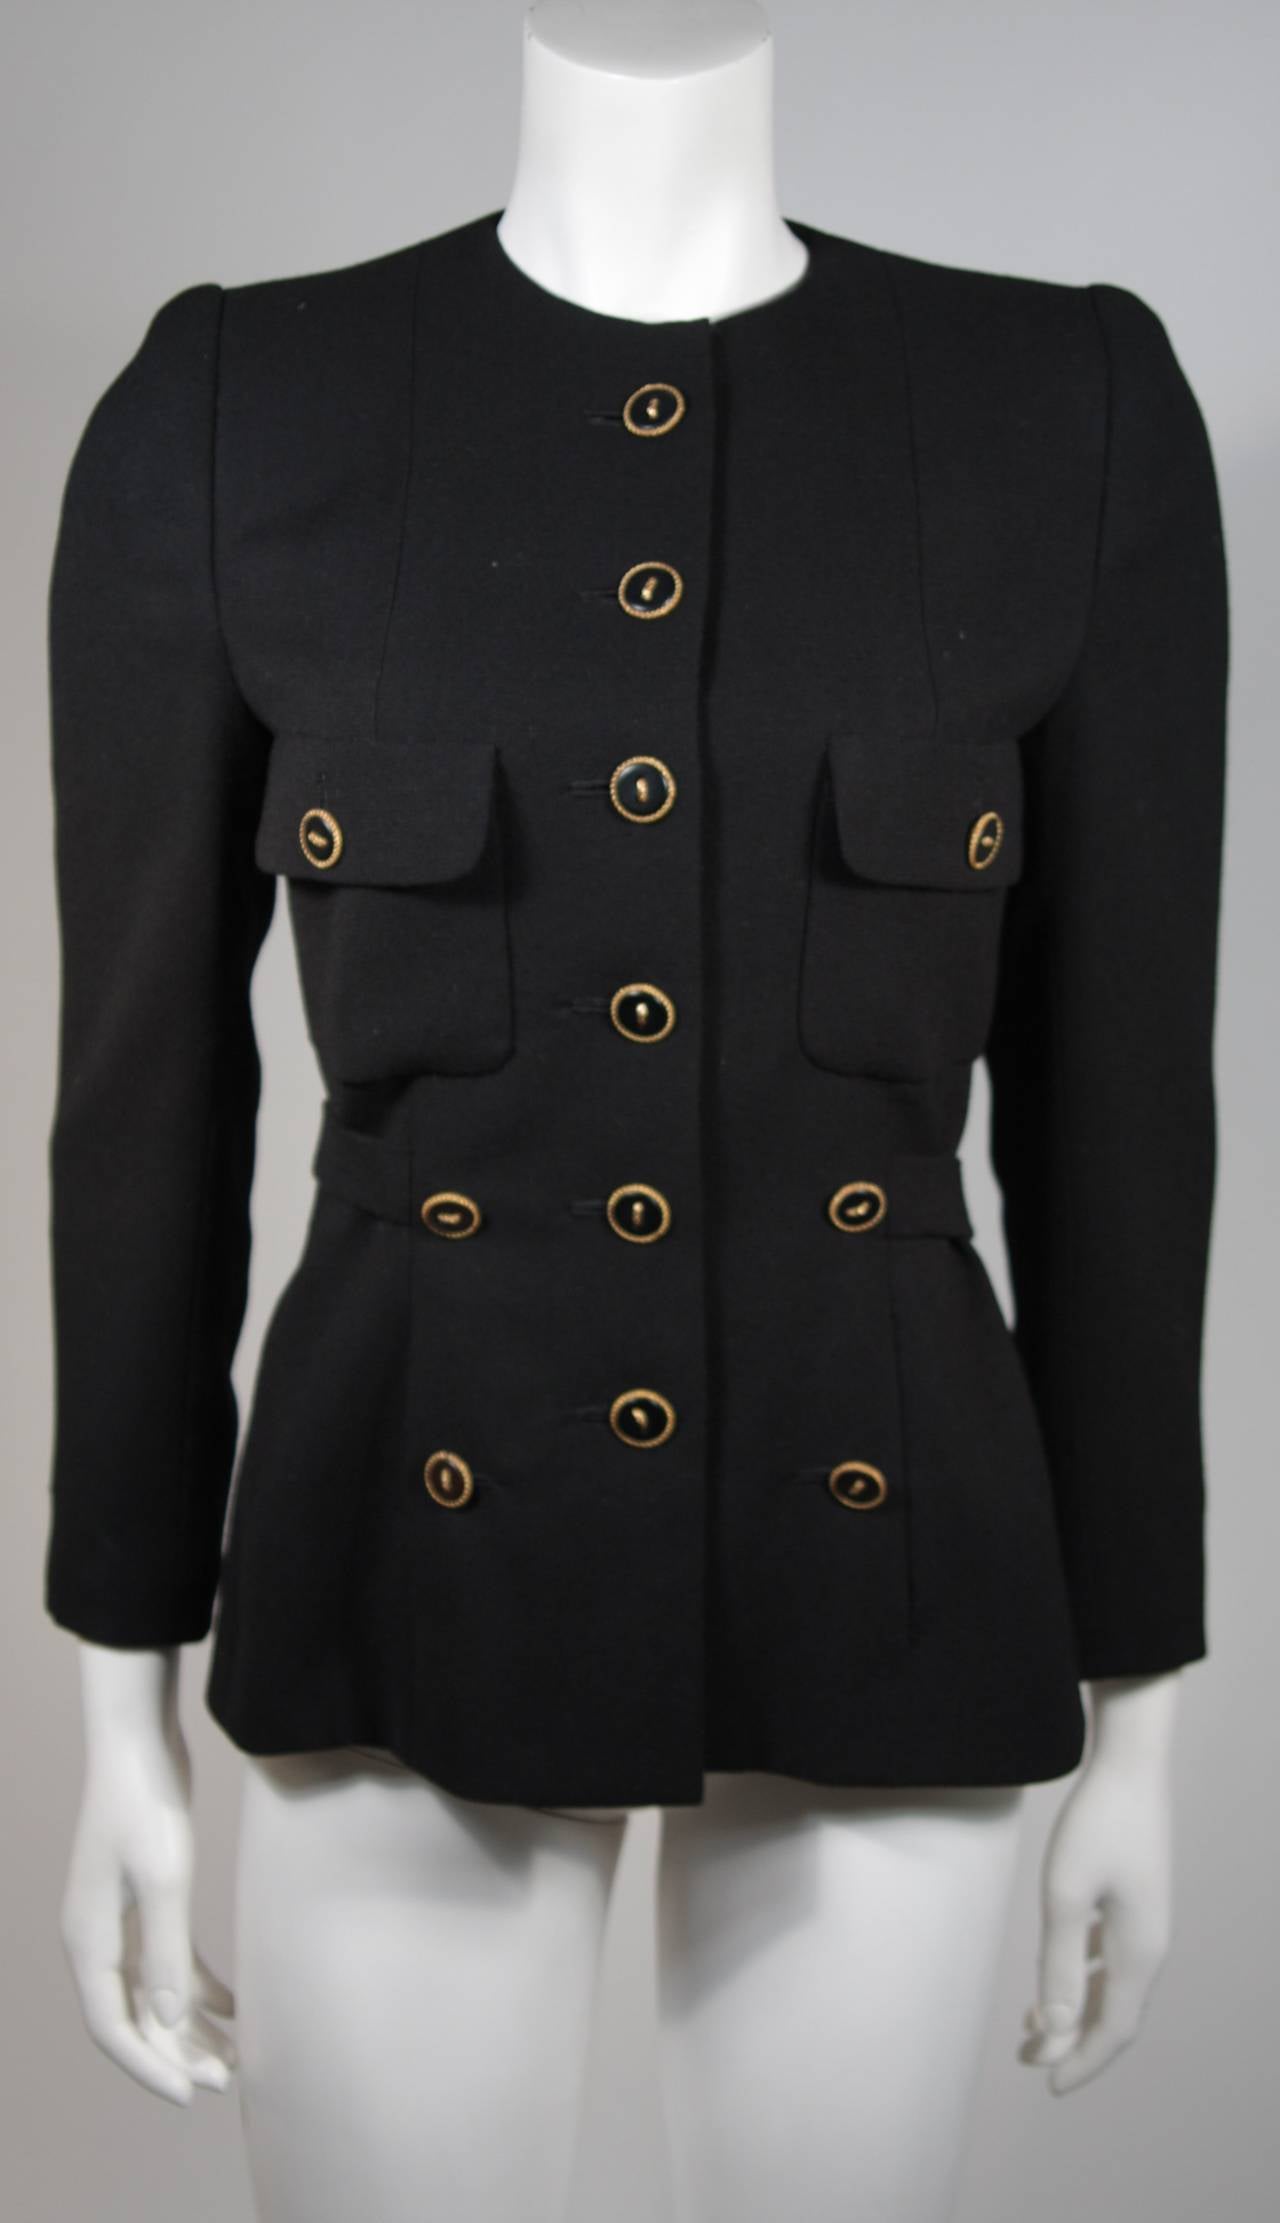 Chanel Haute Couture Black Wool Sailor Inspired Suit Size 2-4 EU 34-36 1